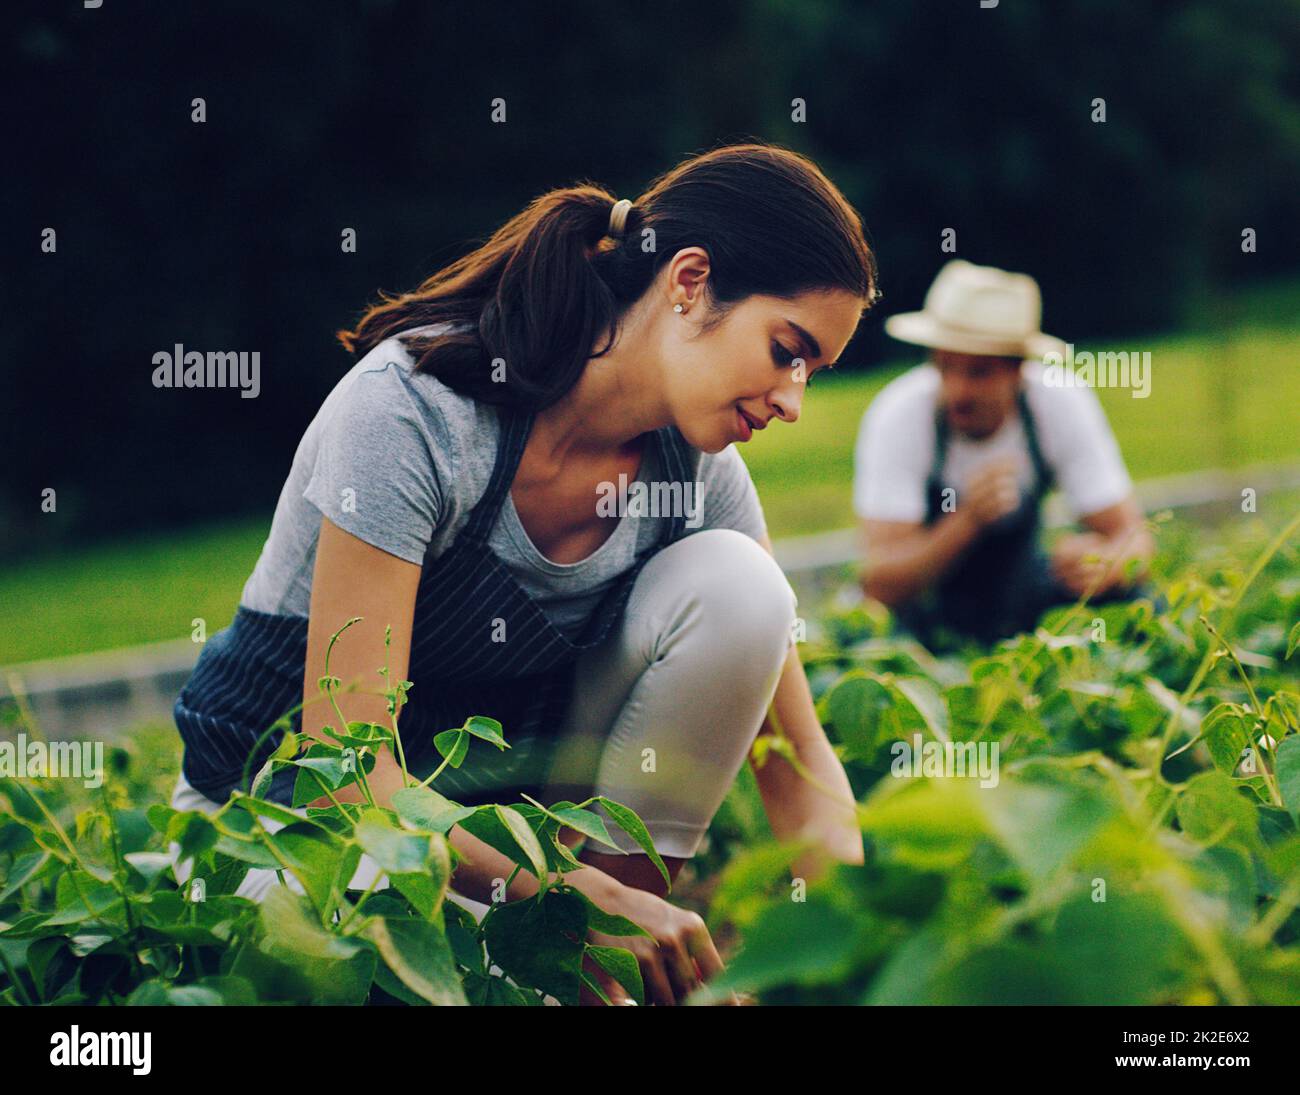 Nothing grows a garden like hard work. Shot of a young woman working in a garden with her husband in the background. Stock Photo